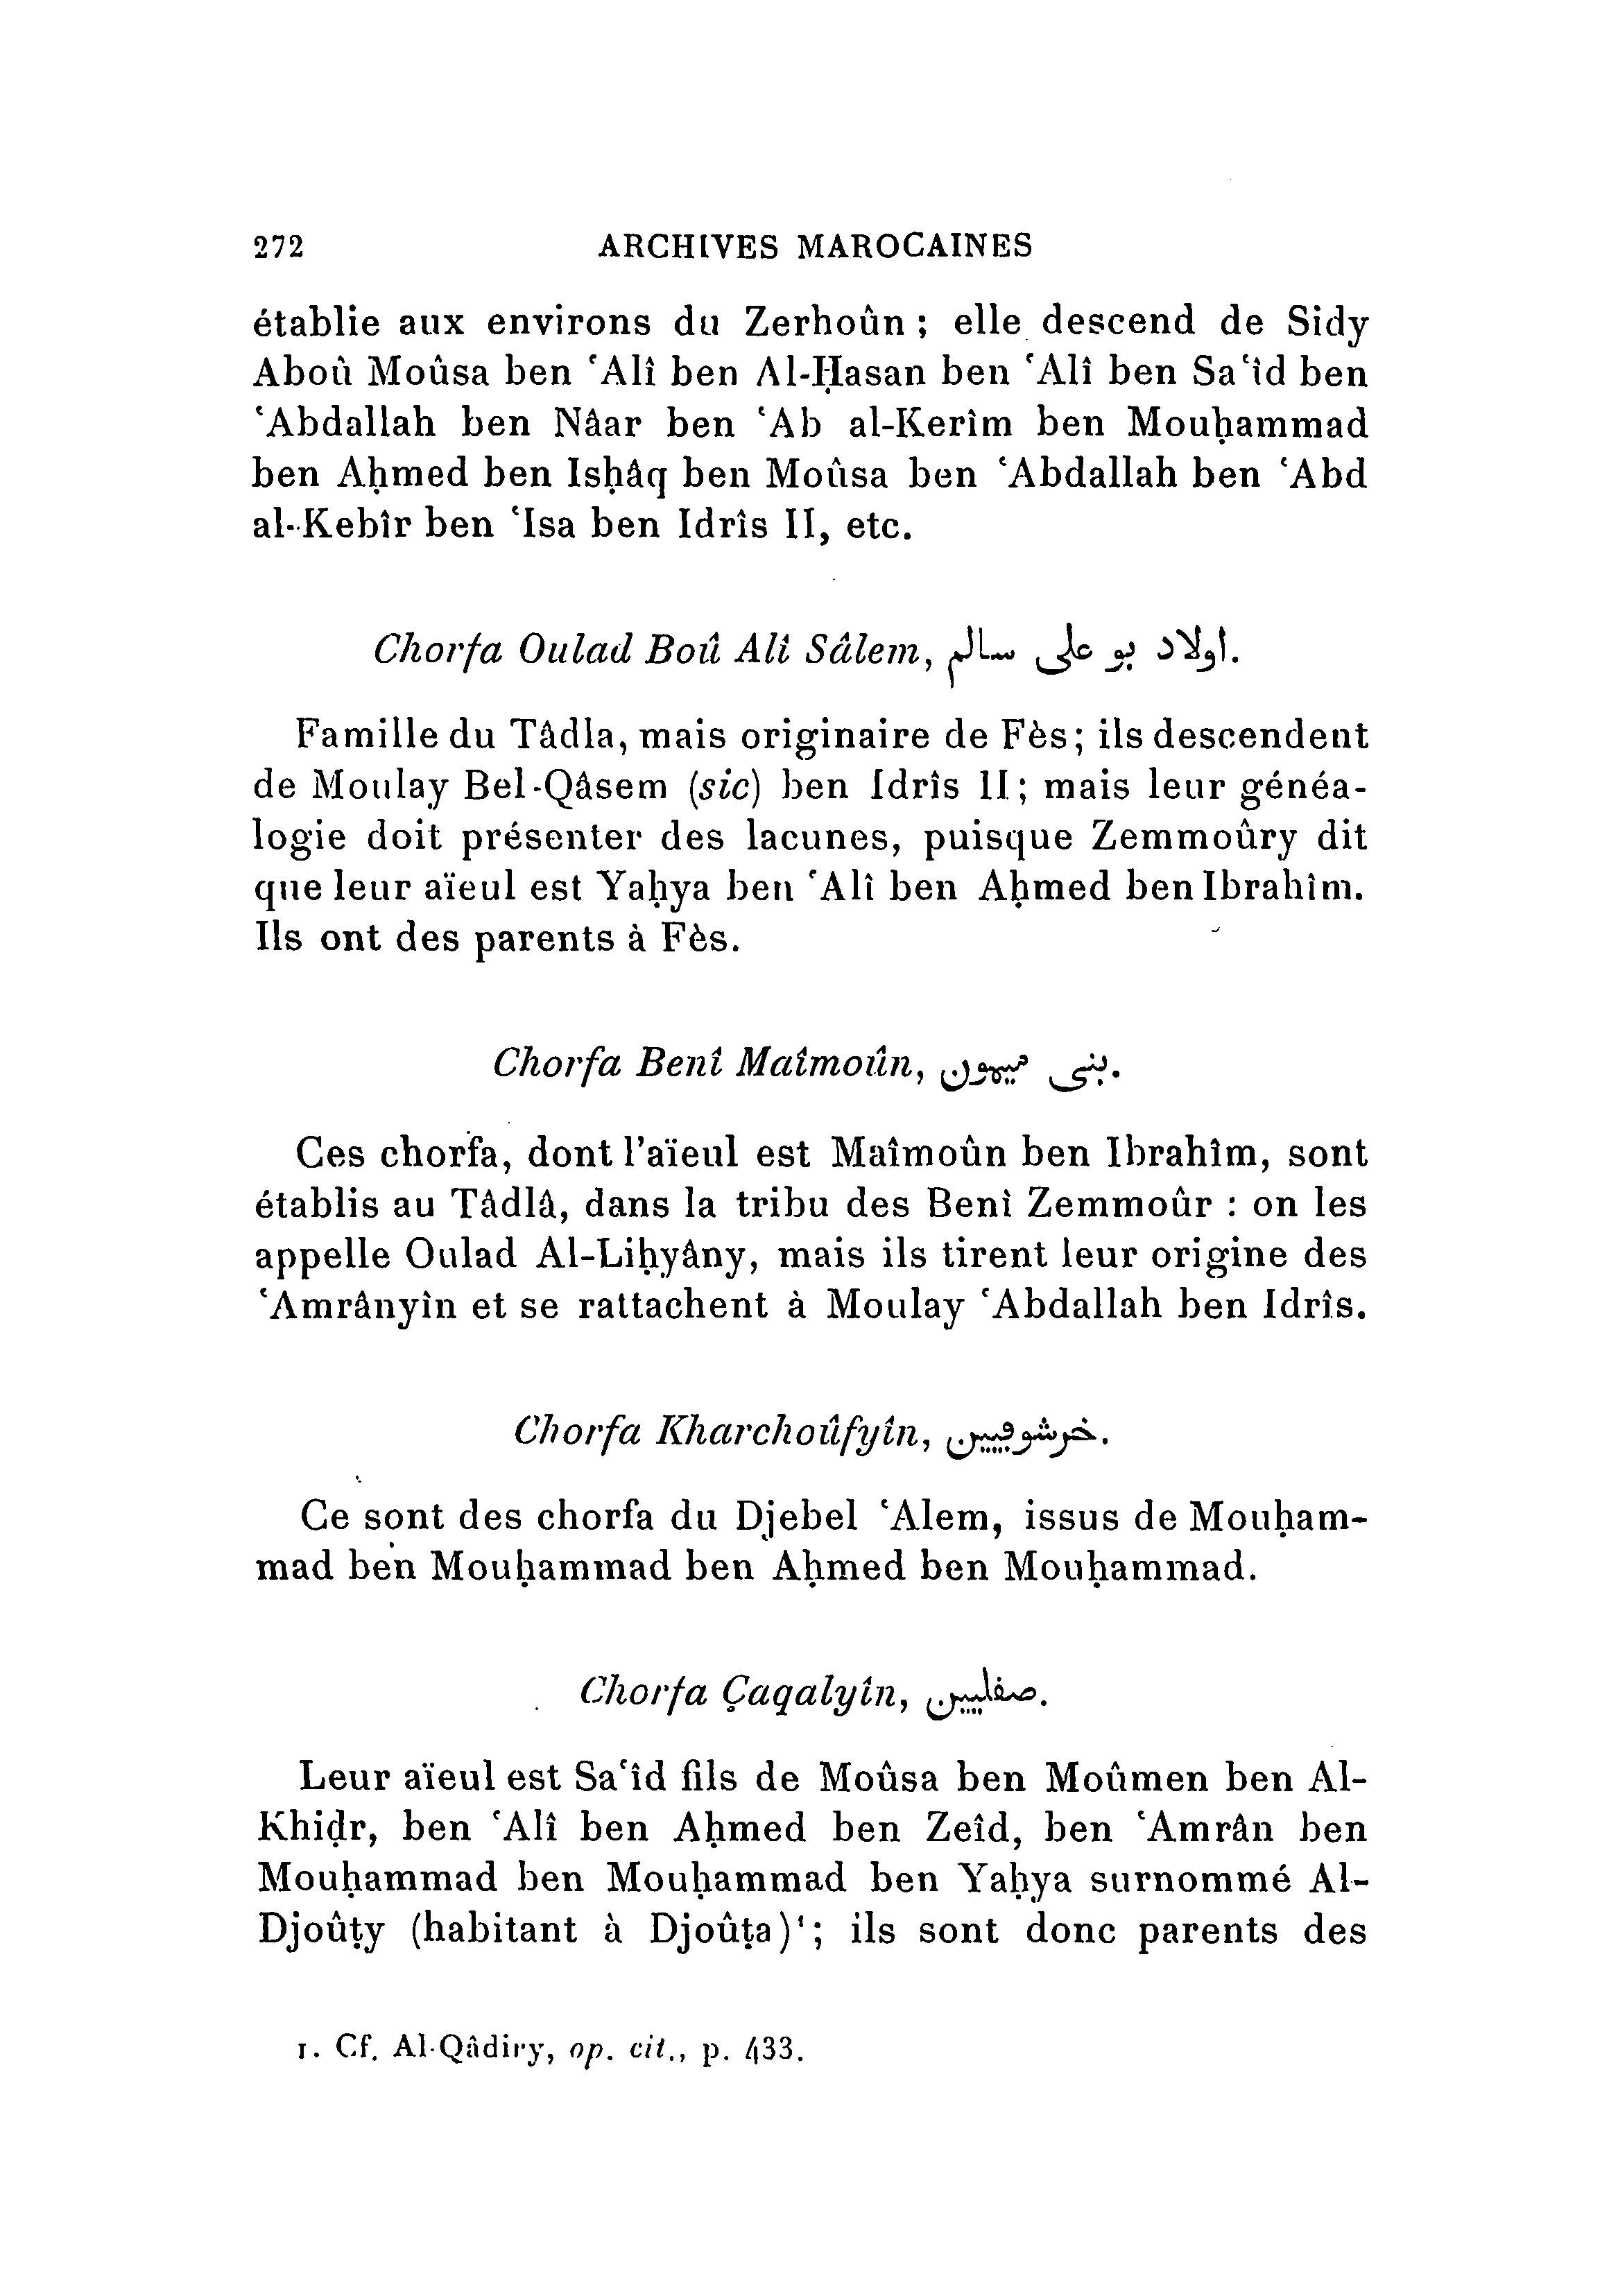 archives_marocaines-vol-2_1_page_447